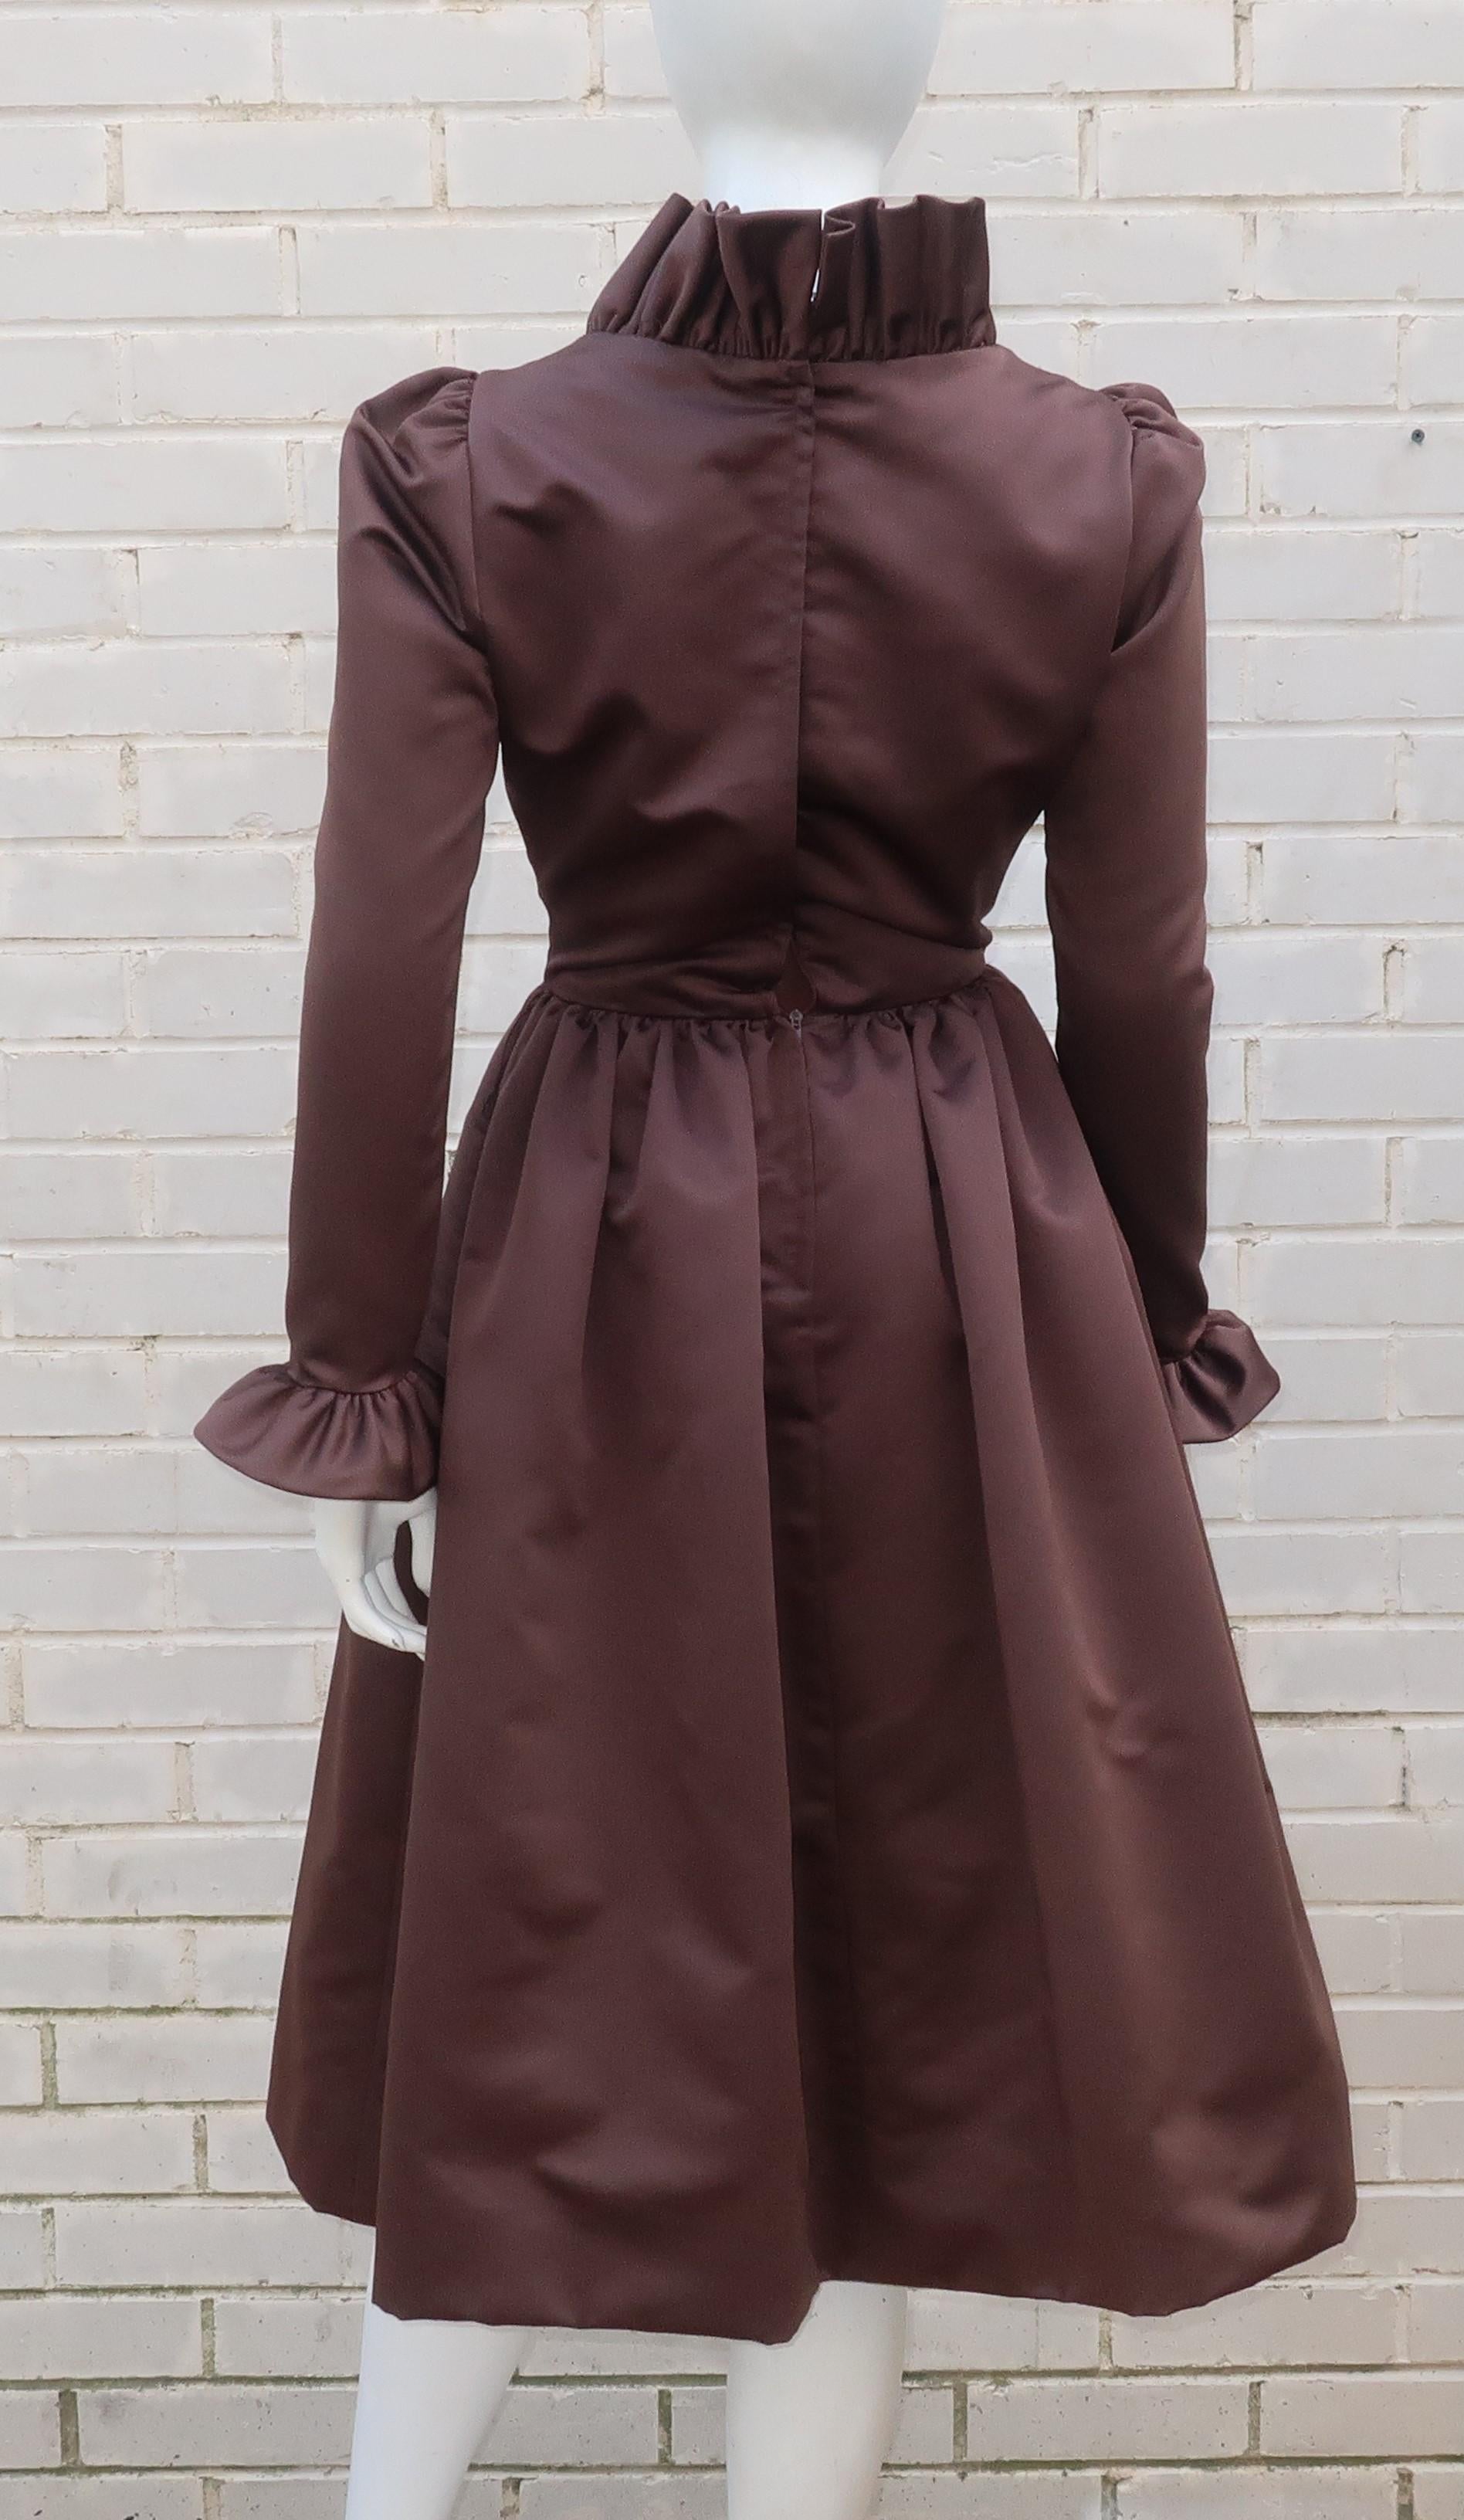 Jill Richards Brown Satin Ruffled Cocktail Dress, 1970's For Sale 4